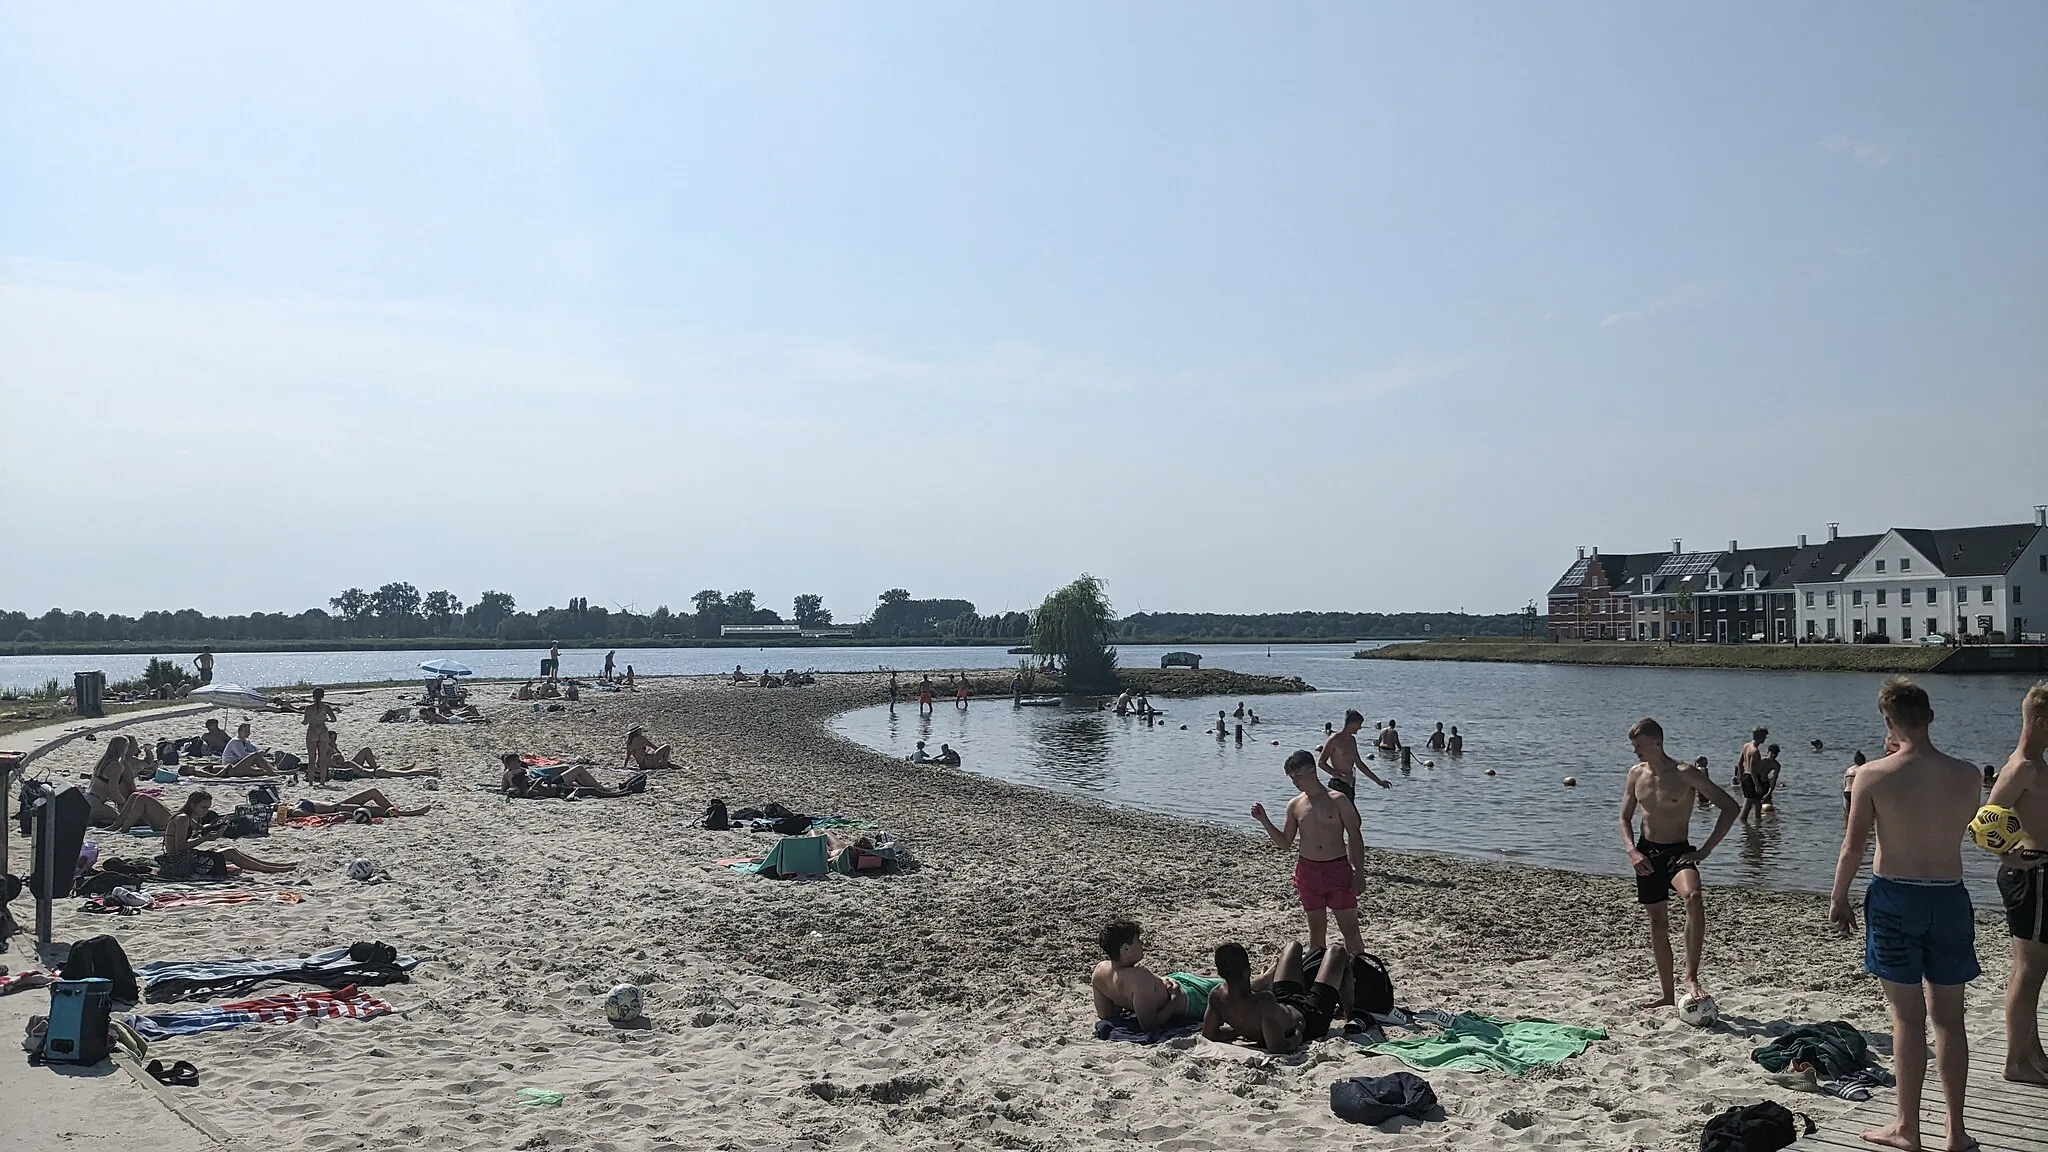 Photo showing: An example of the recreational area of the Groninger village of the Blauwestad, Oldambt during the hottest month of the year with beachgoers and other activities.